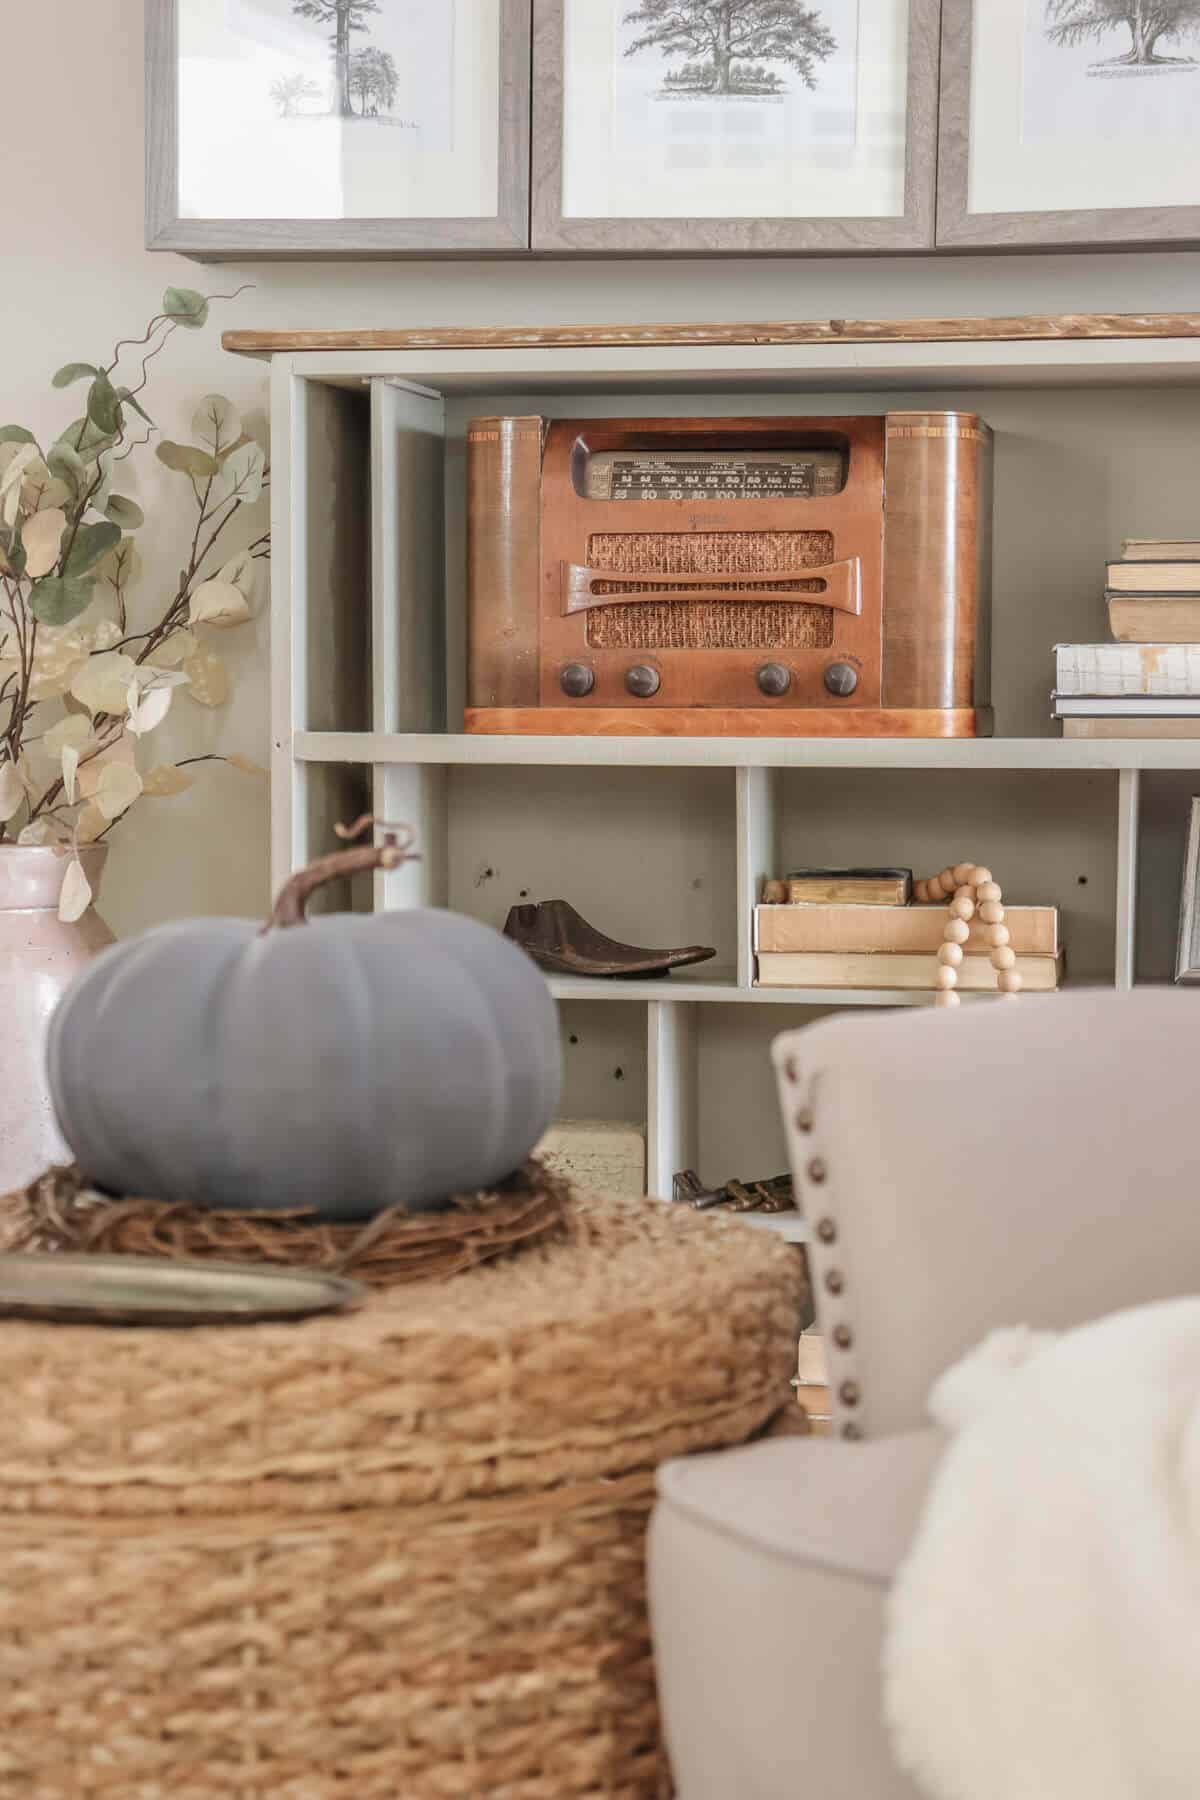 Vintage radio on a shelf with old books and gray fall decor